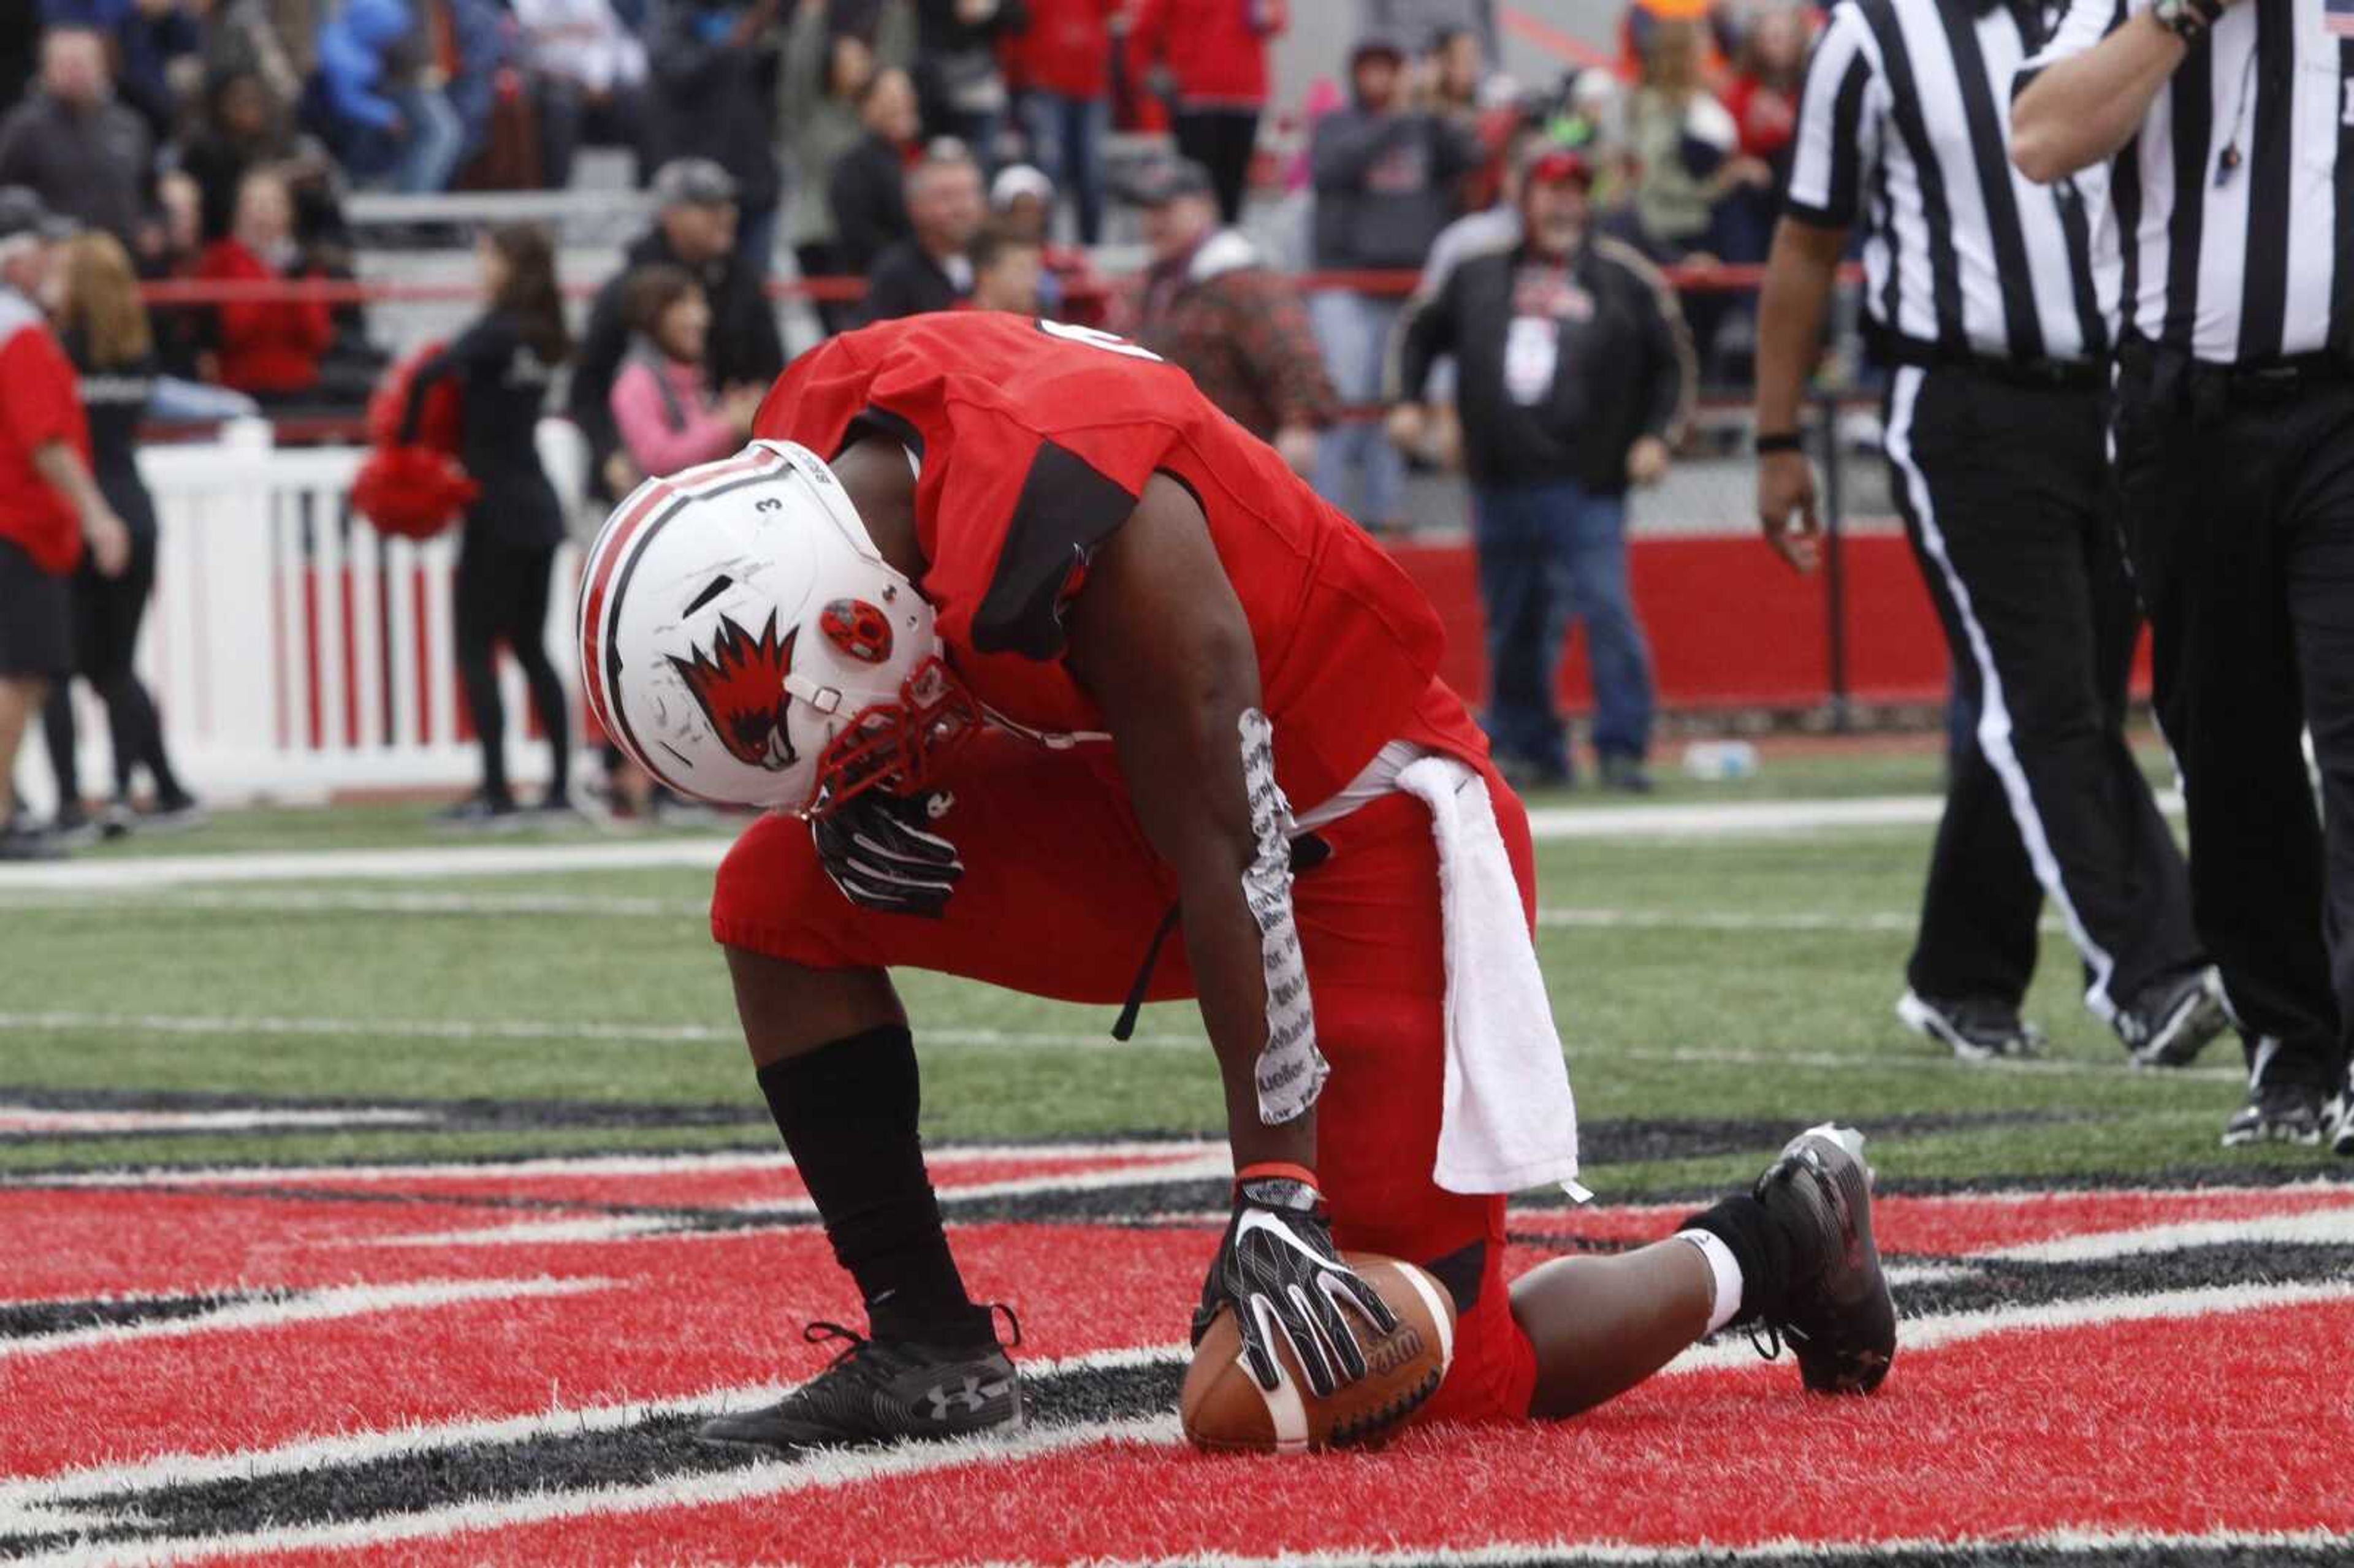 Senior running back Marquis Terry kneels in the end zone after scoring the game-winning touchdown against Austin Peay on Oct. 13.